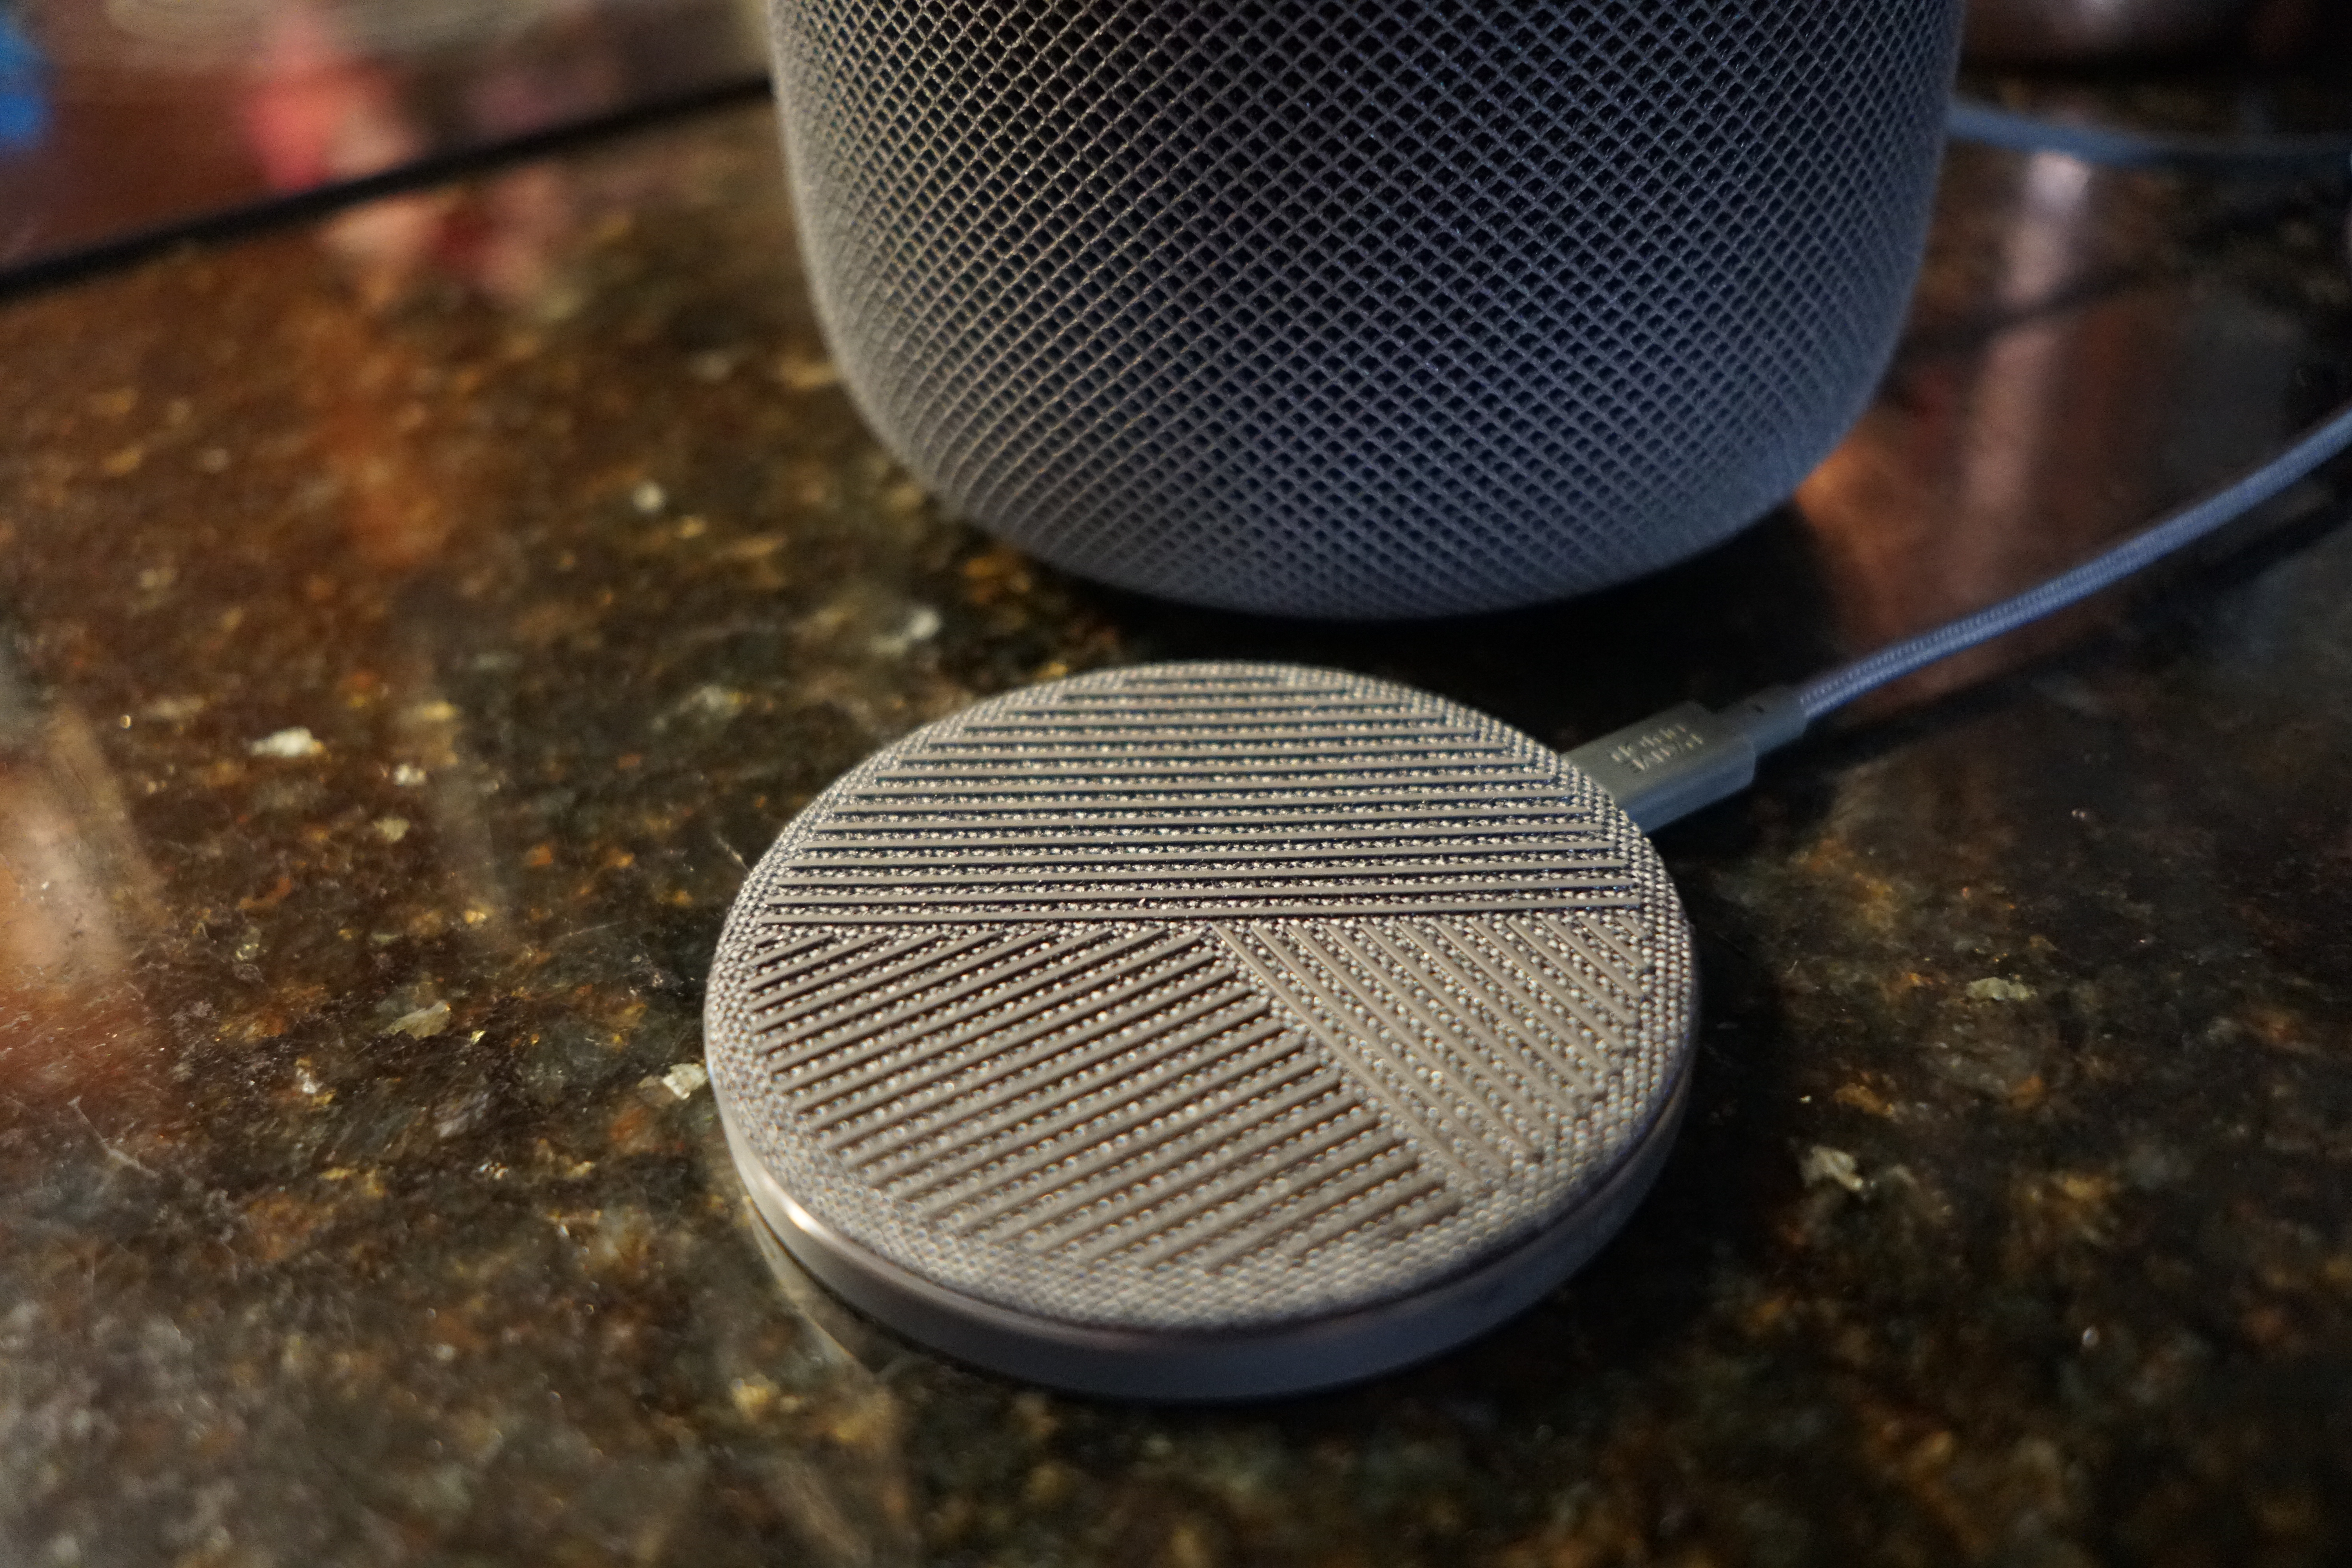 Schrijf een brief manipuleren Associëren Review: Native Union's Drop Wireless Charger for iPhone X and Qi devices  perfectly complements HomePod's design - 9to5Mac